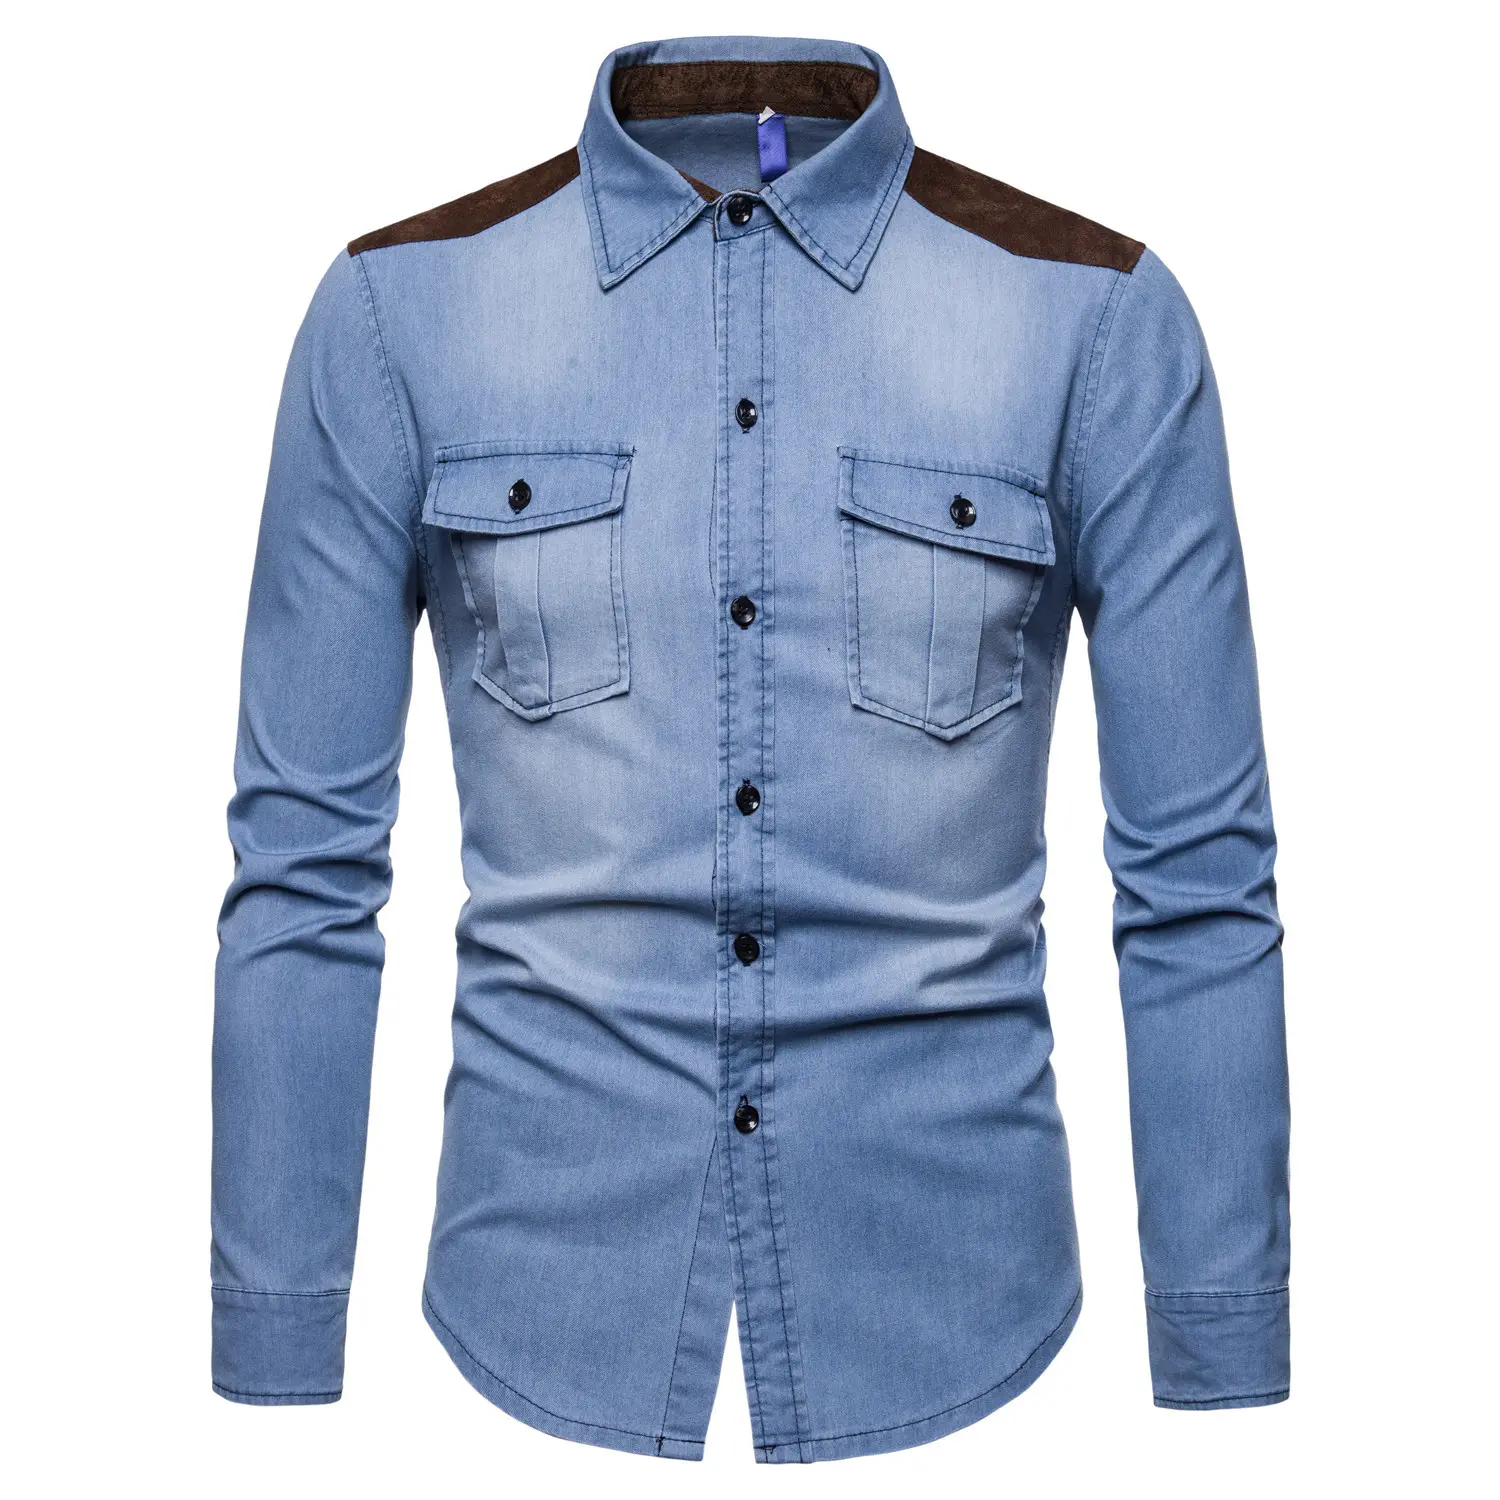 Casual Demin Shirts Longe Sleeve Cotton Washed Jean Shirt For Men Being Popular In Wish